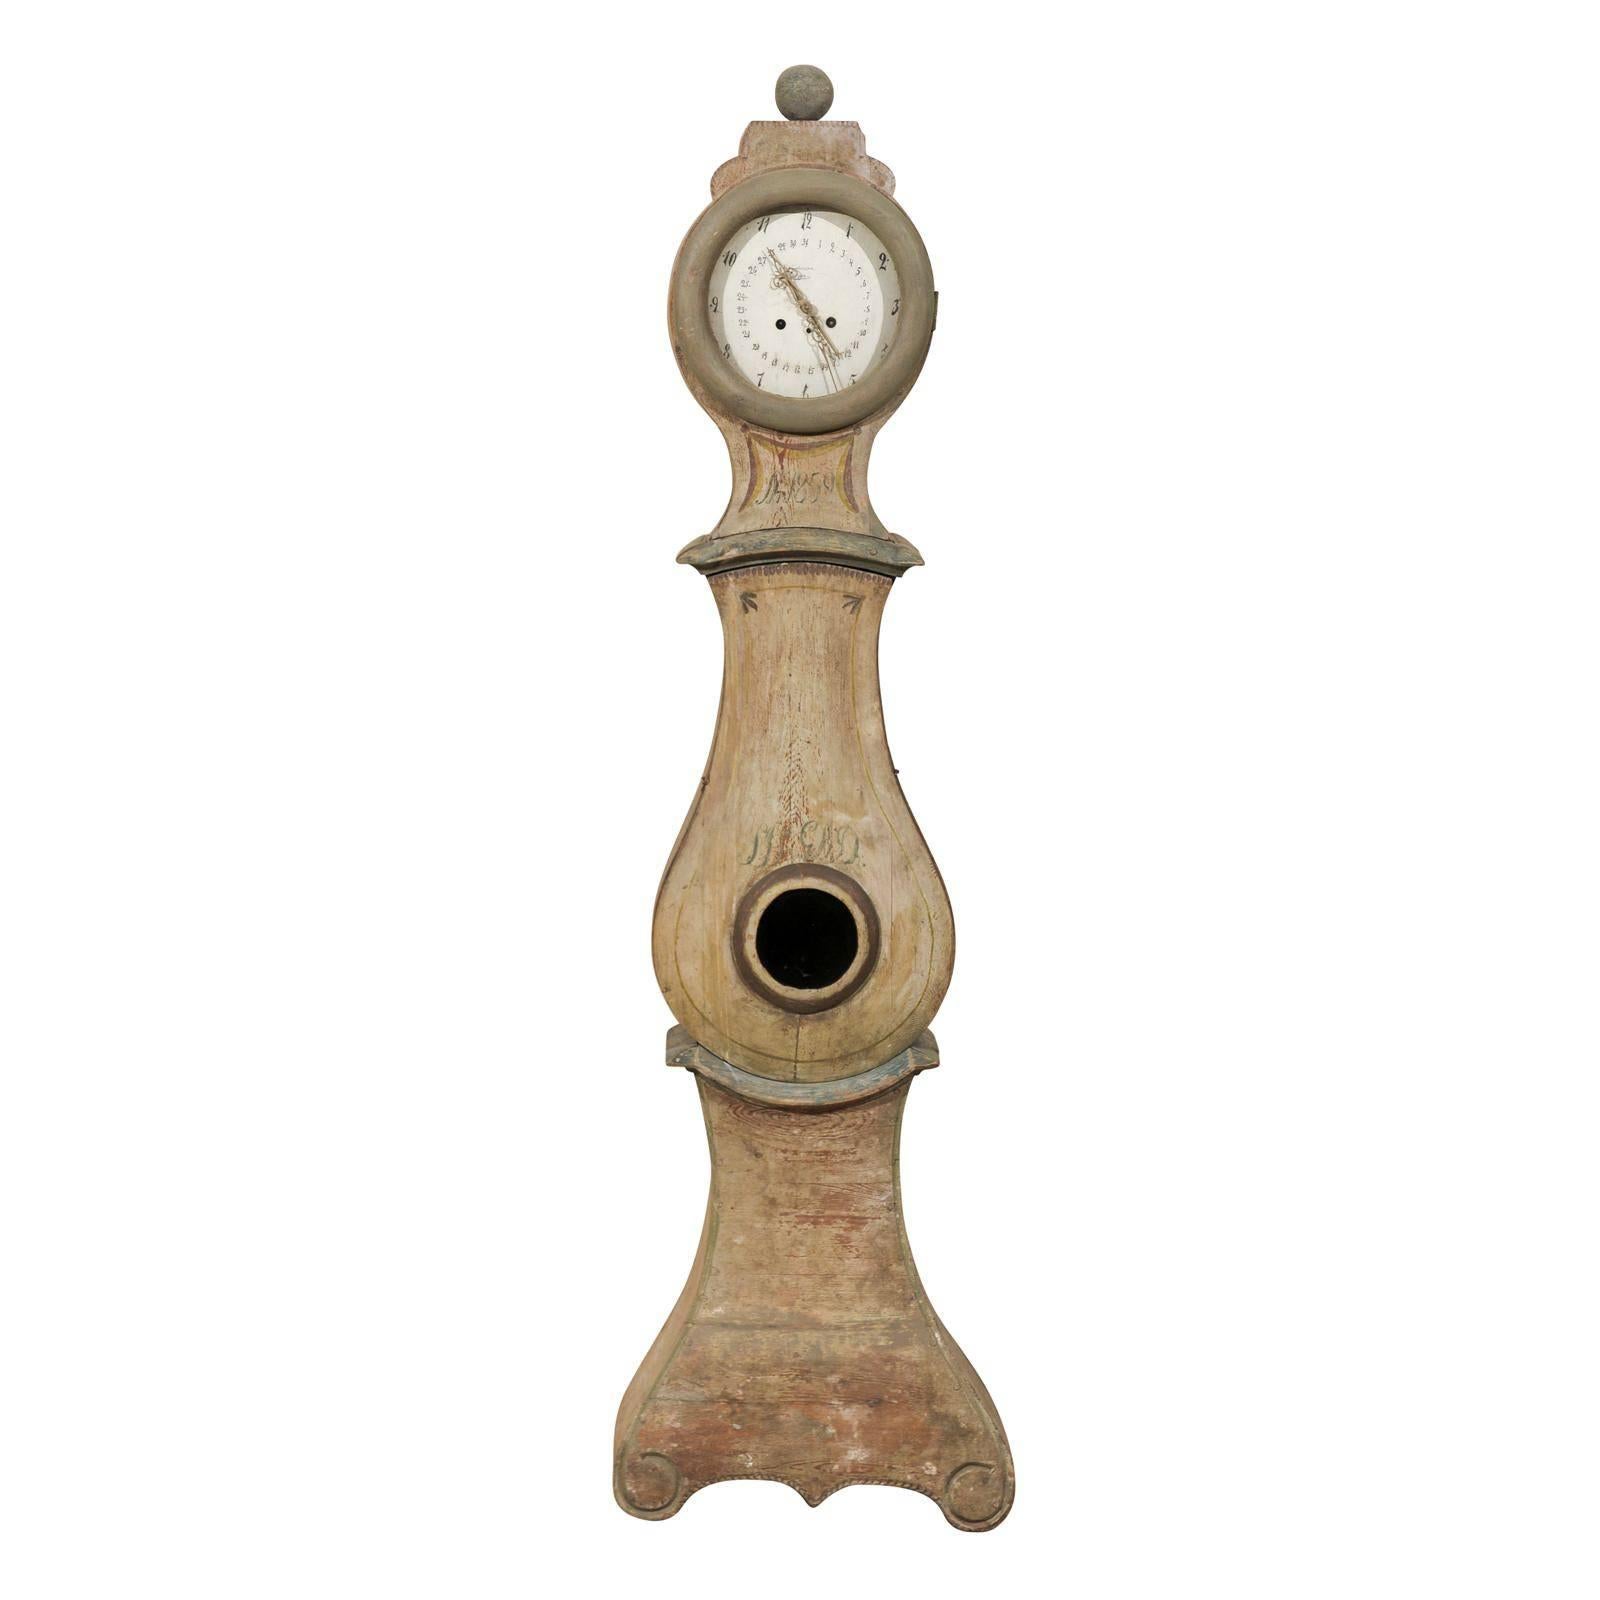 Exquisite Swedish 19th Century Clock with Carved Crest and Volutes on the Base